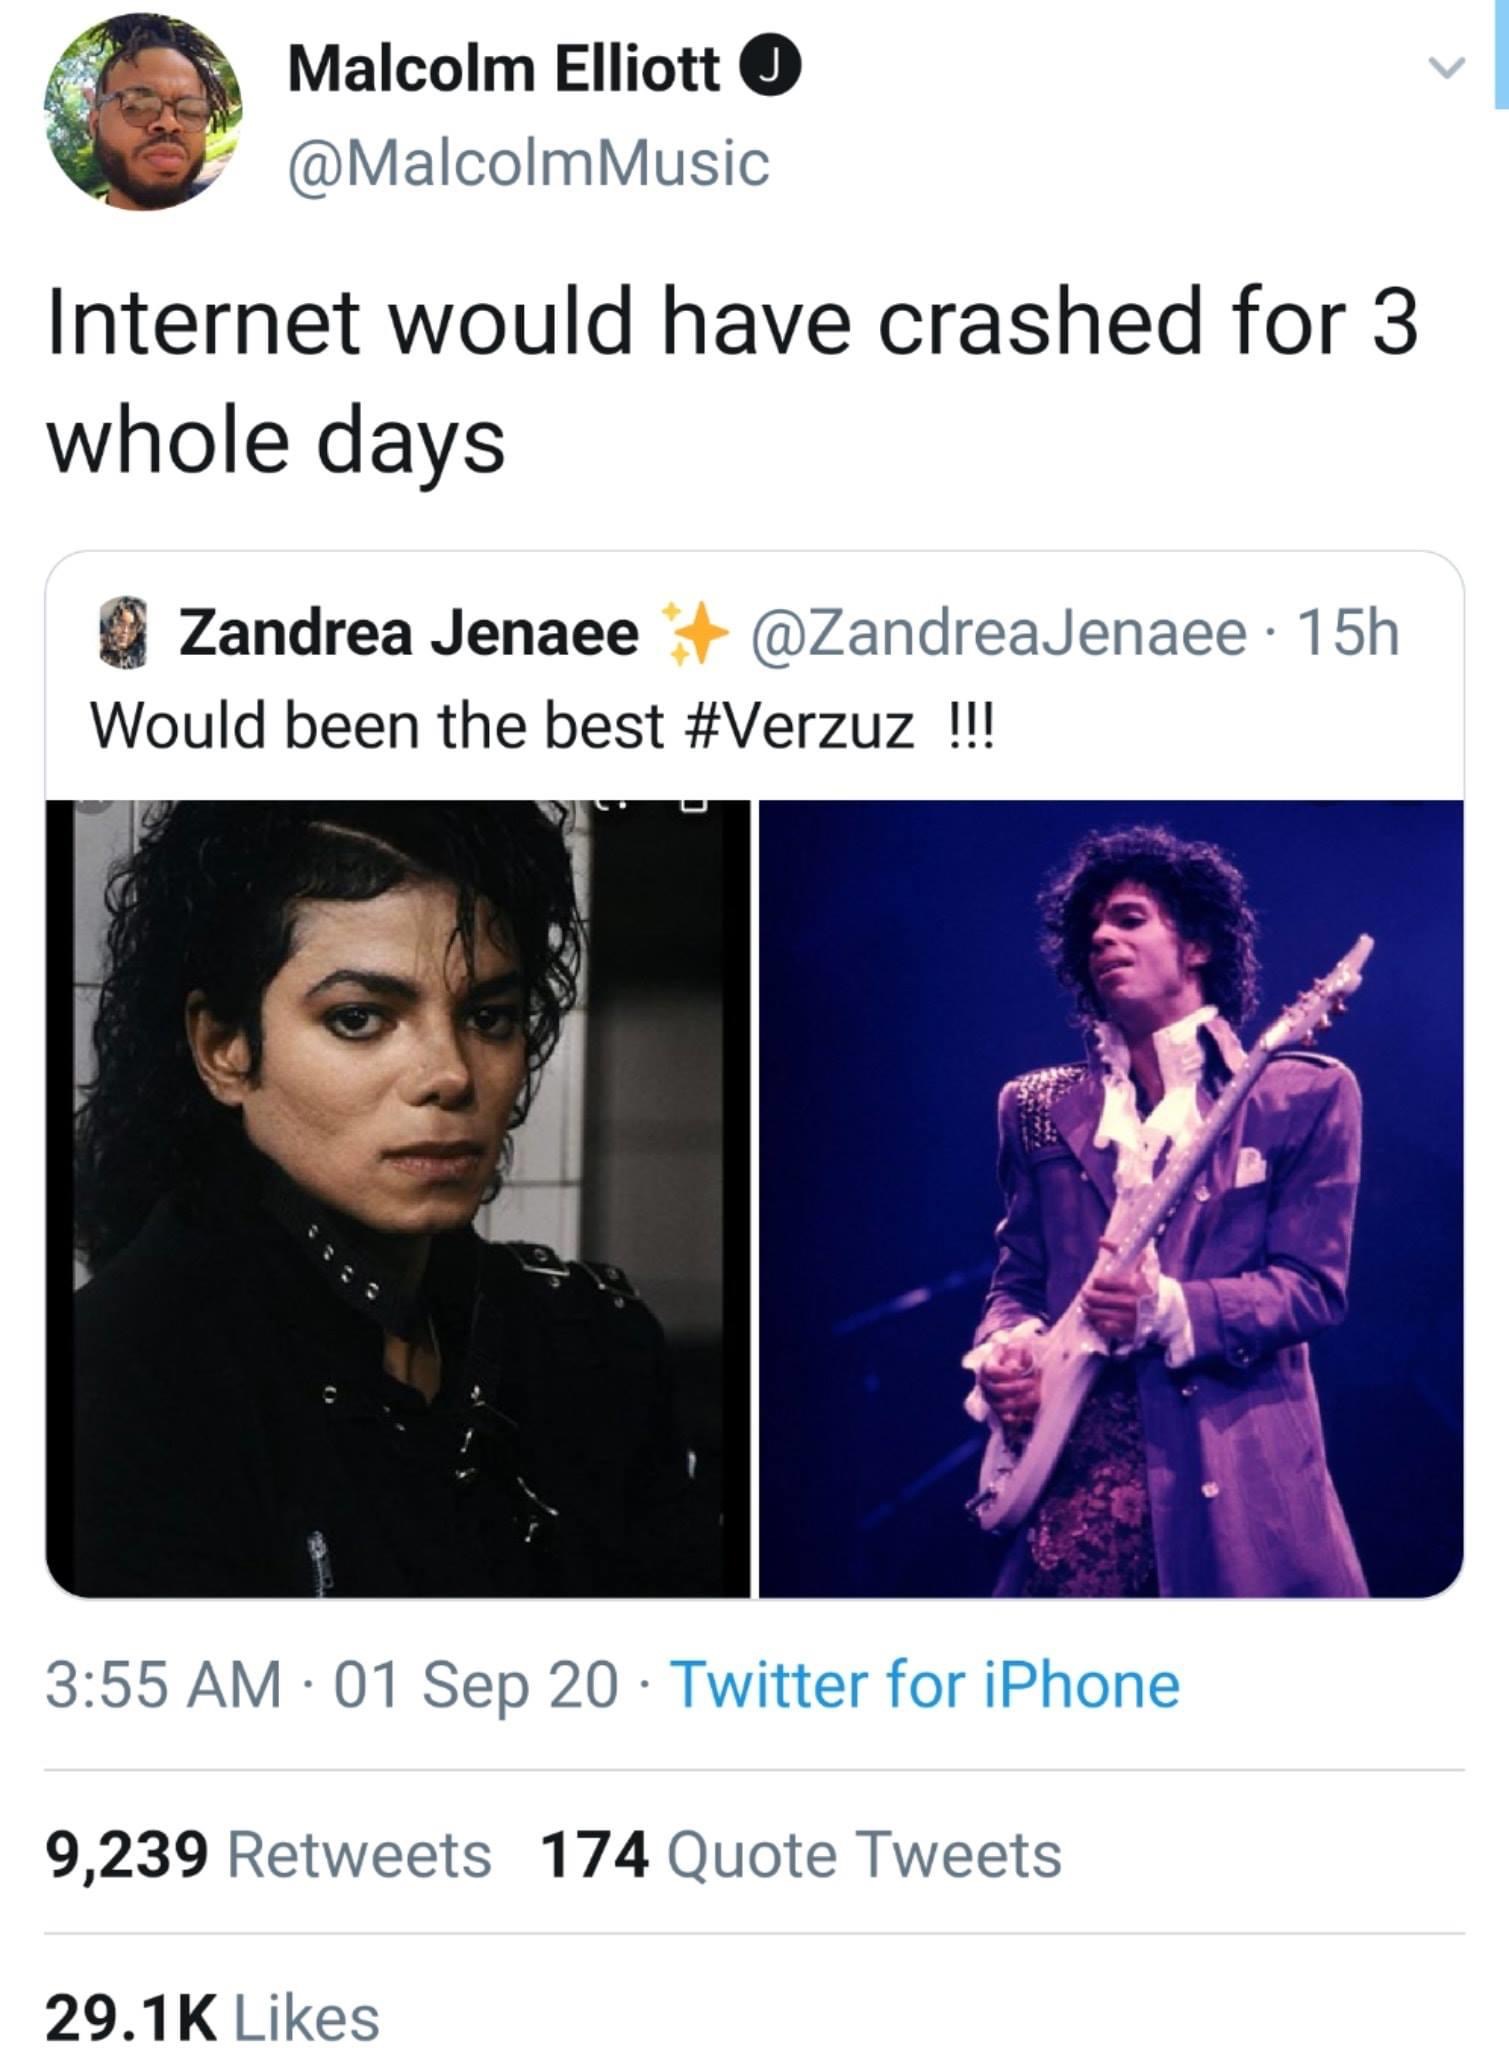 media - Malcolm Elliott Music Internet would have crashed for 3 whole days Zandrea Jenaee Jenaee 15h Would been the best !!! 01 Sep 20 Twitter for iPhone 9,239 174 Quote Tweets